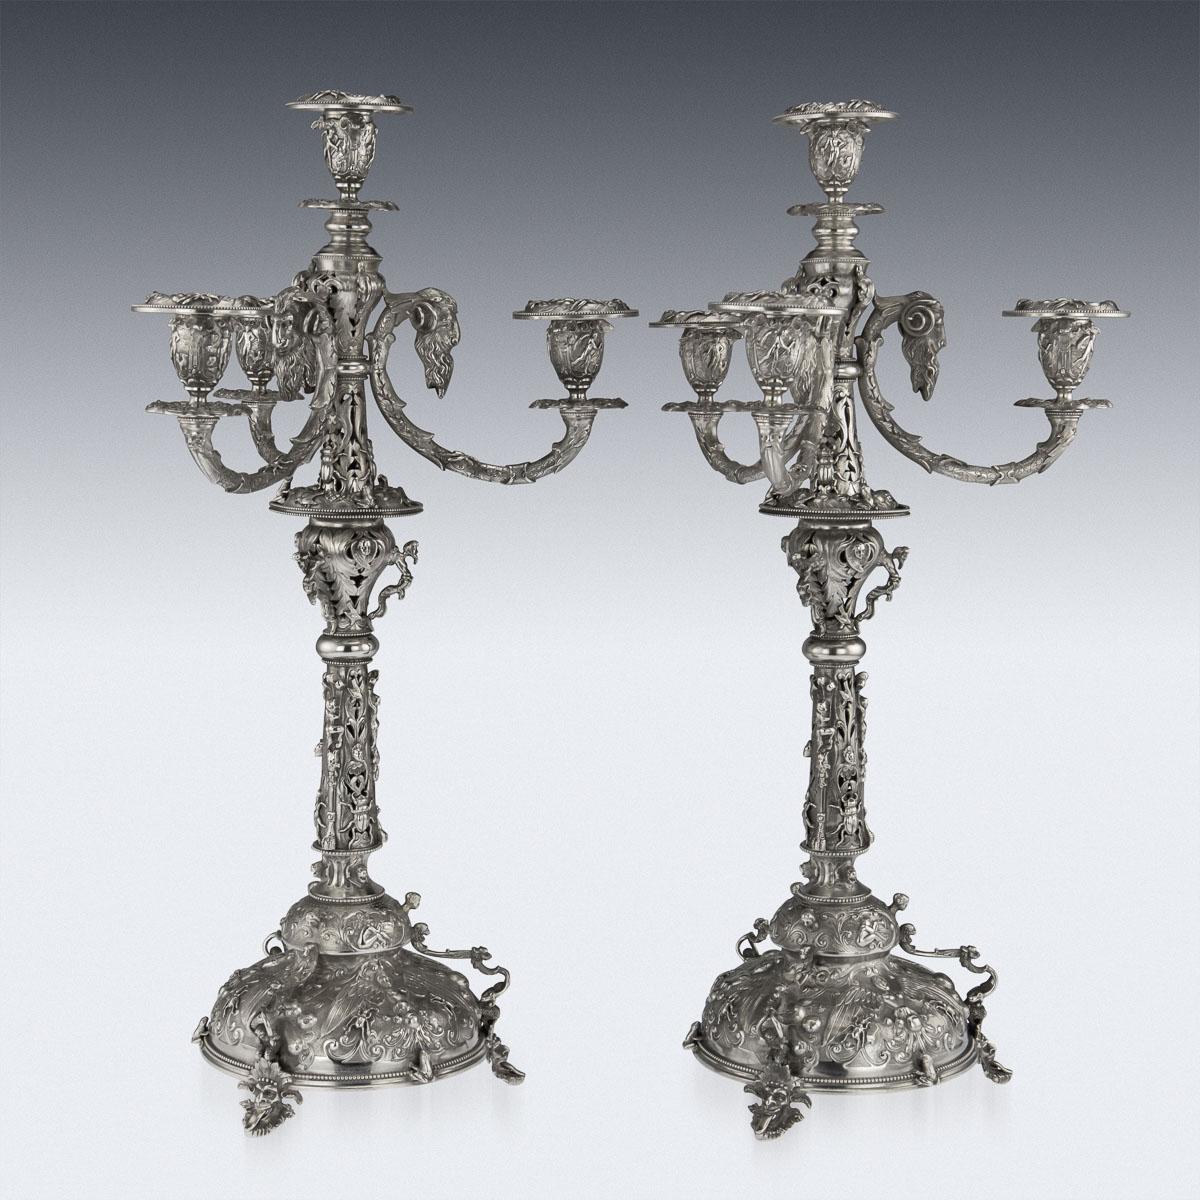 Victorian Solid Silver Set of Four Candelabras, Macrae, circa 1872-1873 For Sale 3